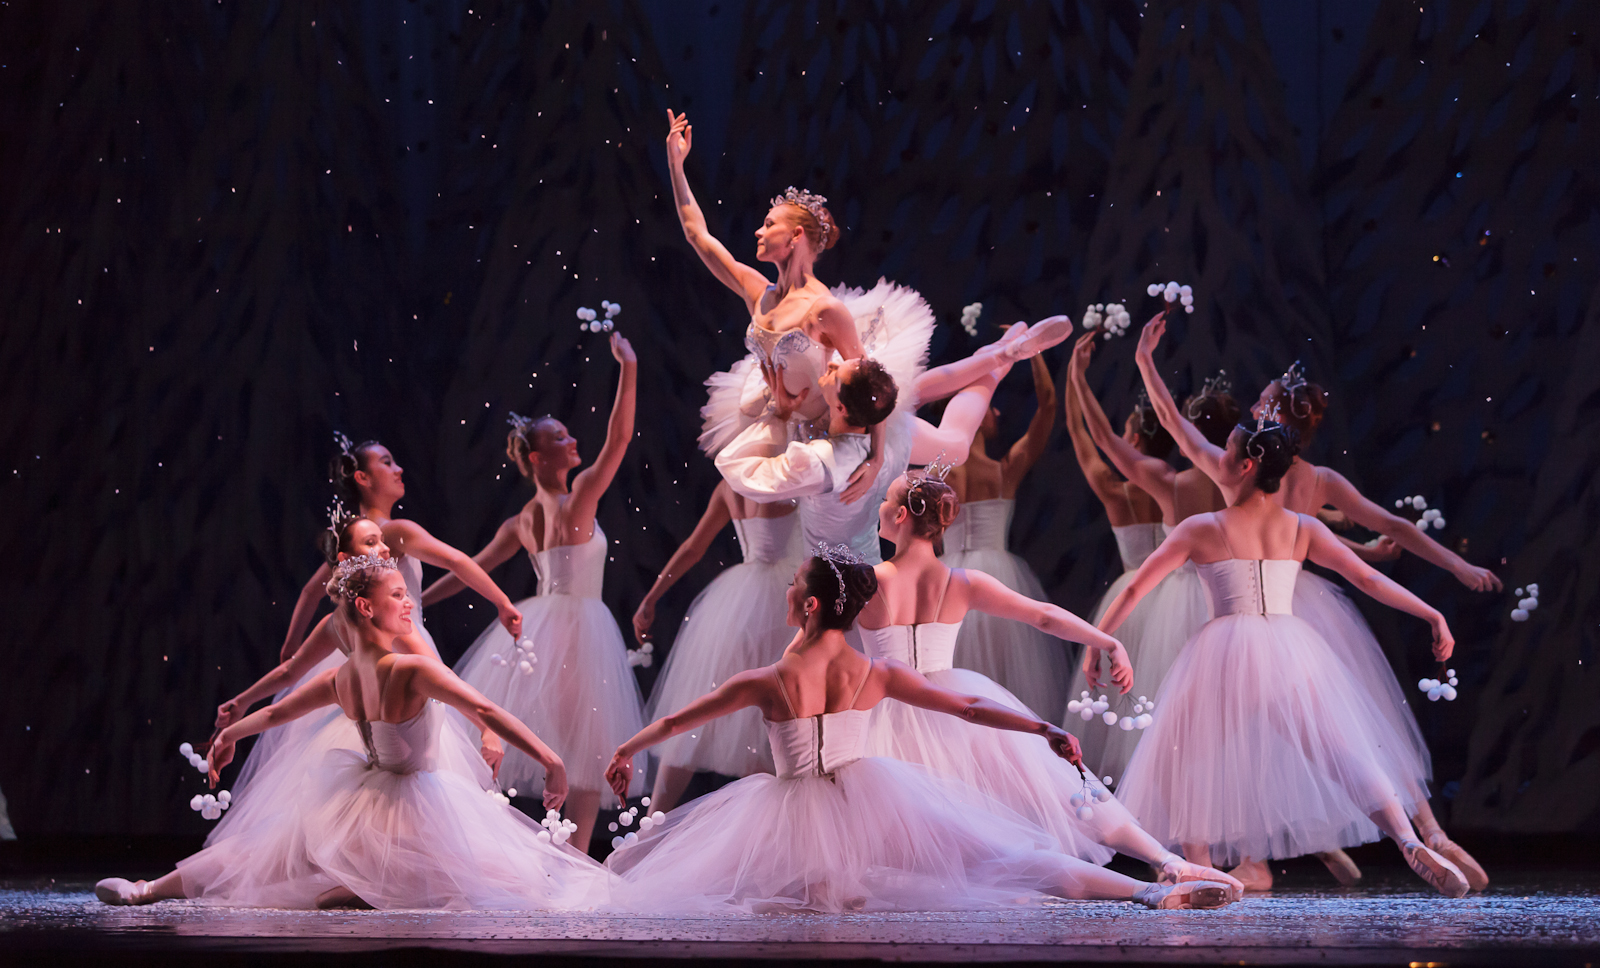 More than a dozen women dressed in white surround the Sugar Plum Fairy, also dressed in white, whose held in the air by a man in white in the center of the circle.